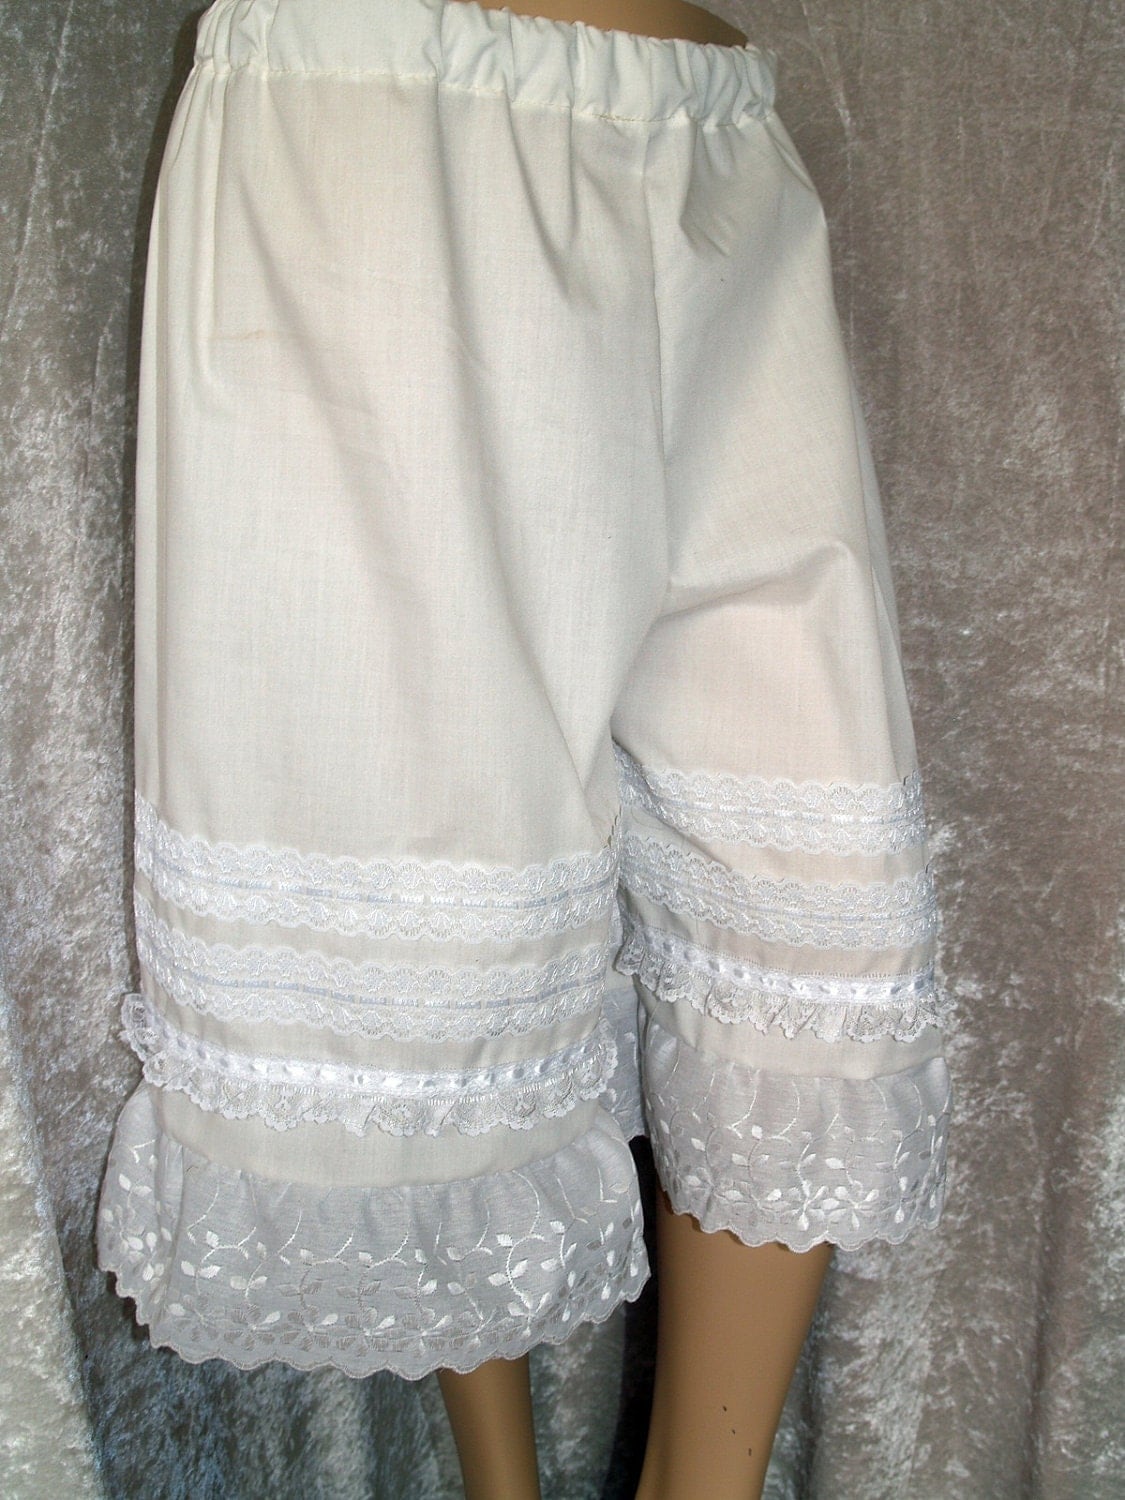 Pantaloons Bloomers Victorian Steampunk Style Pants